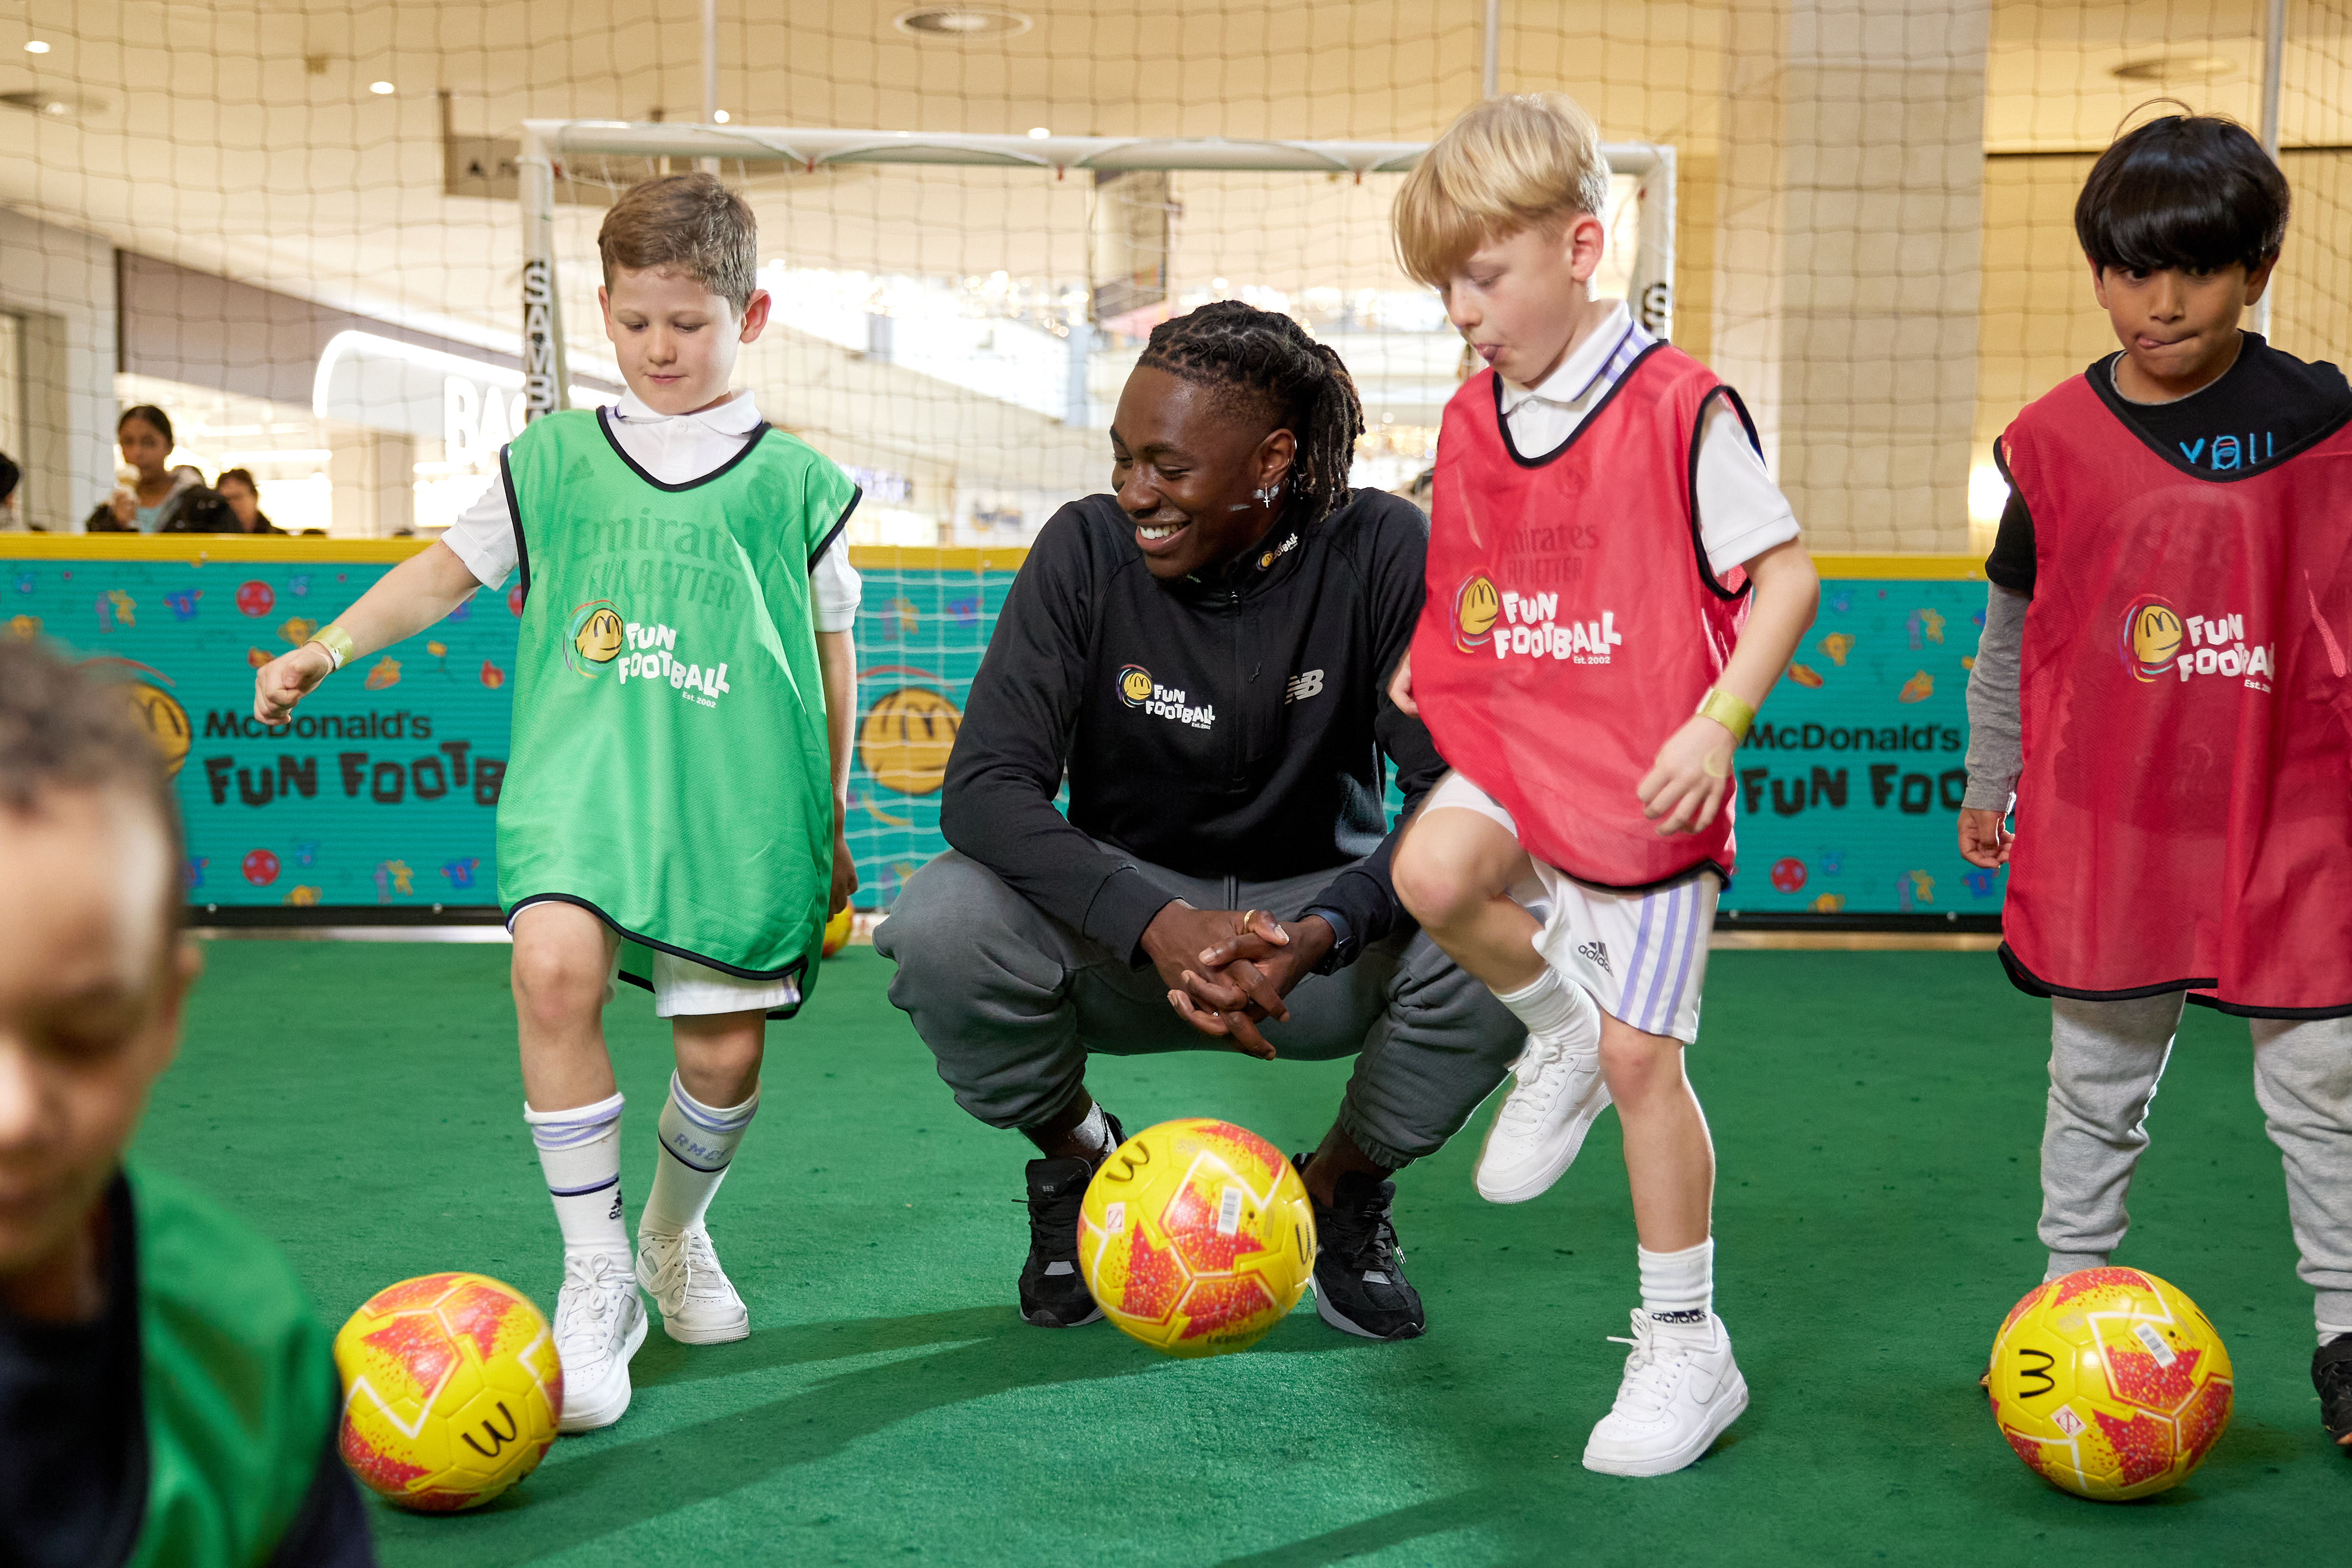 Ebere Eze at McDonald's Fun Football Session in Bluewater